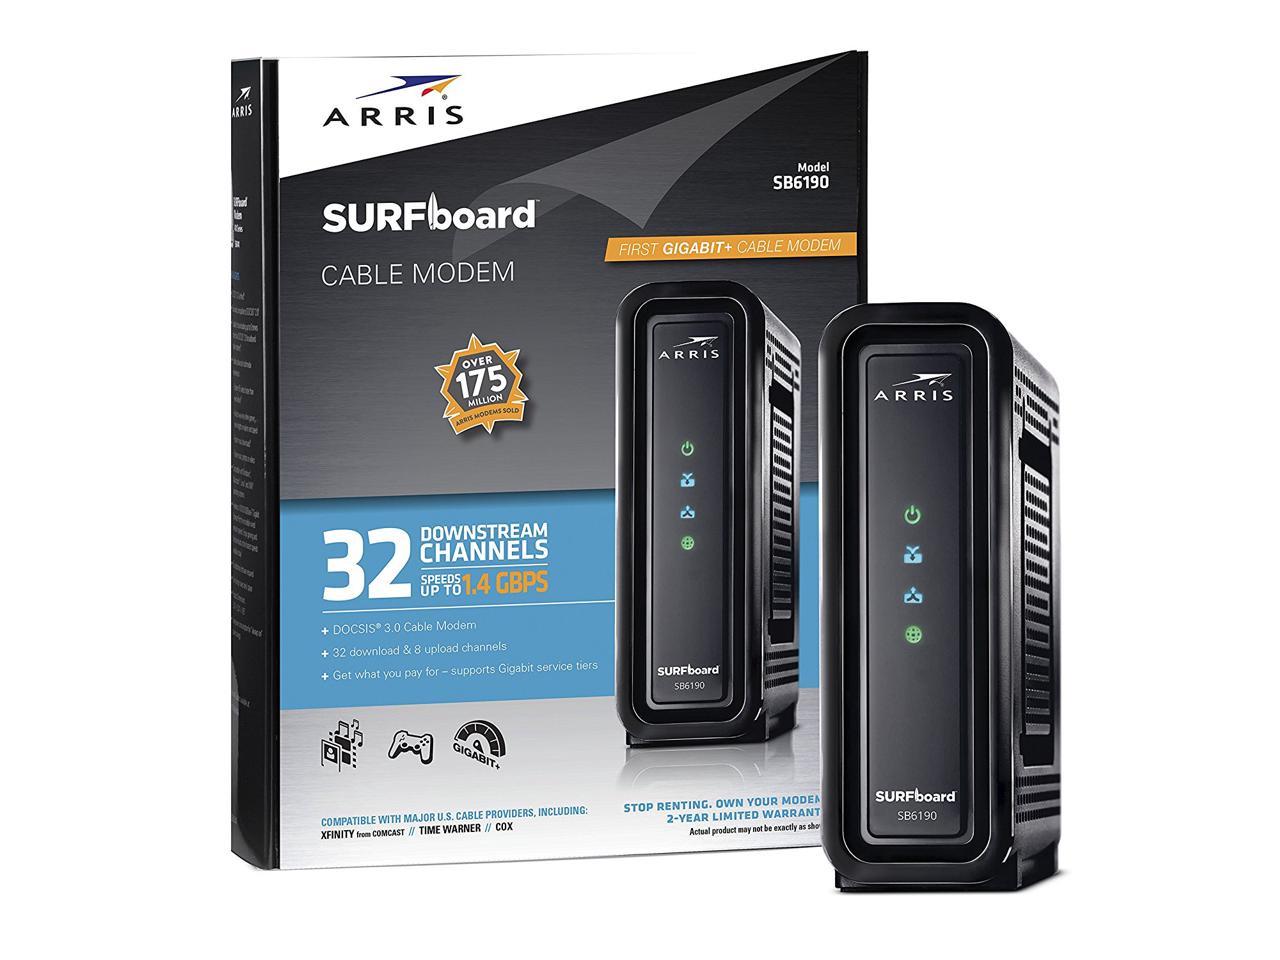 ARRIS Surfboard SB6190 32x8 DOCSIS 3.0 Cable Modem with 1.4 Gbps Download and 262 Upload Speeds Renewed White Non-Retail Packaging 